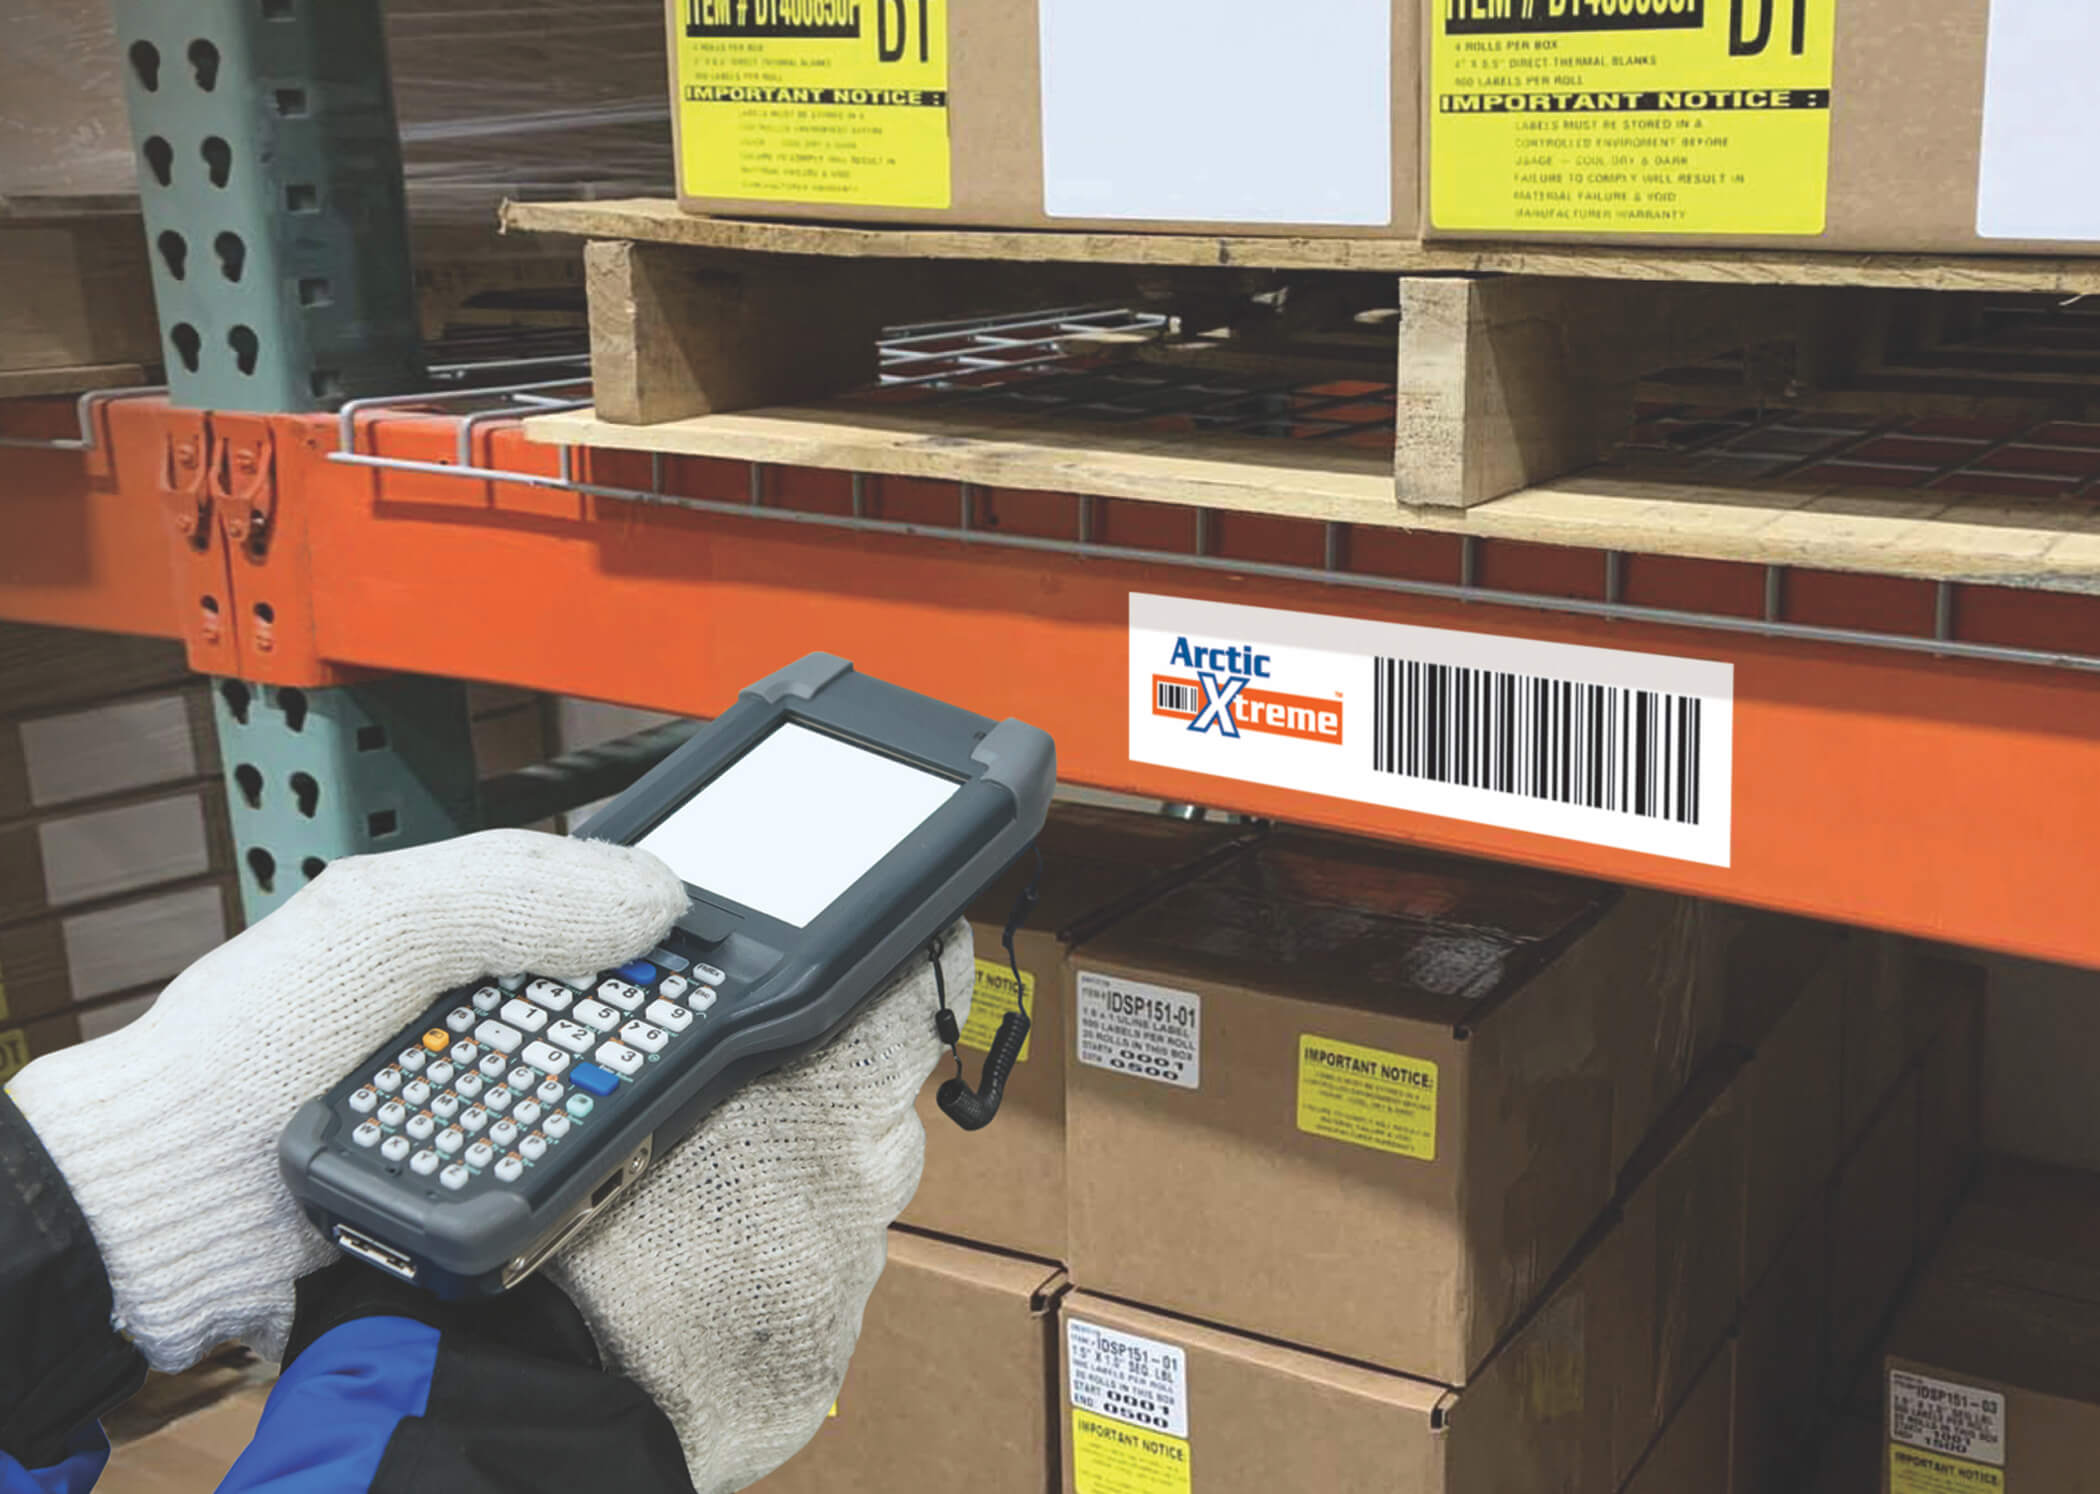 warehouse freezer barcode label being scanned